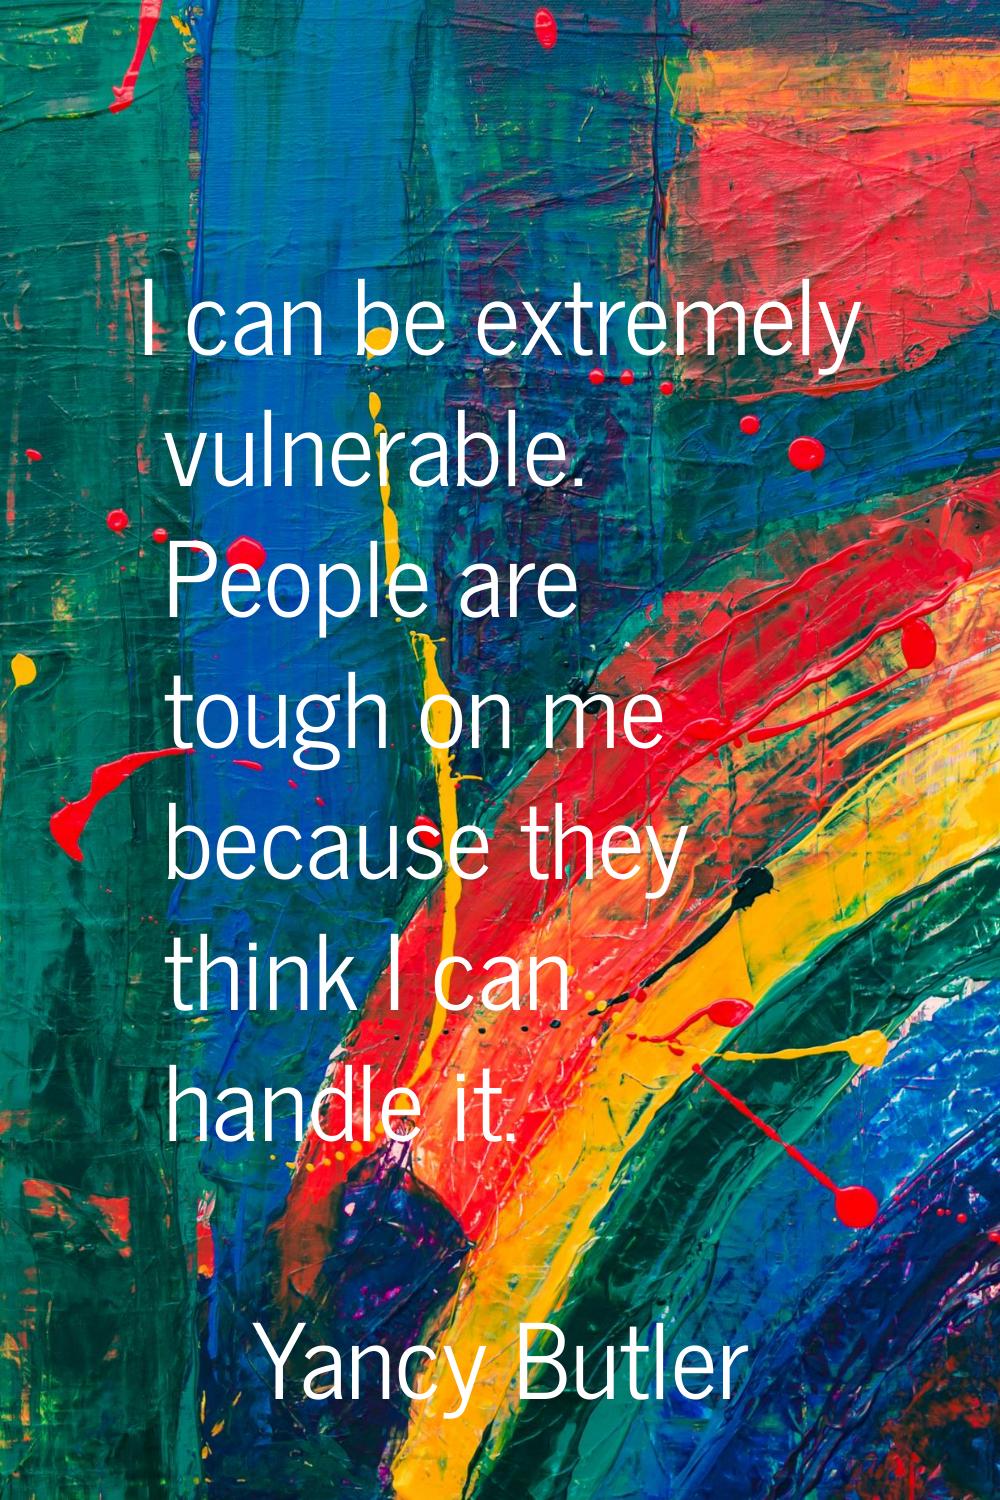 I can be extremely vulnerable. People are tough on me because they think I can handle it.